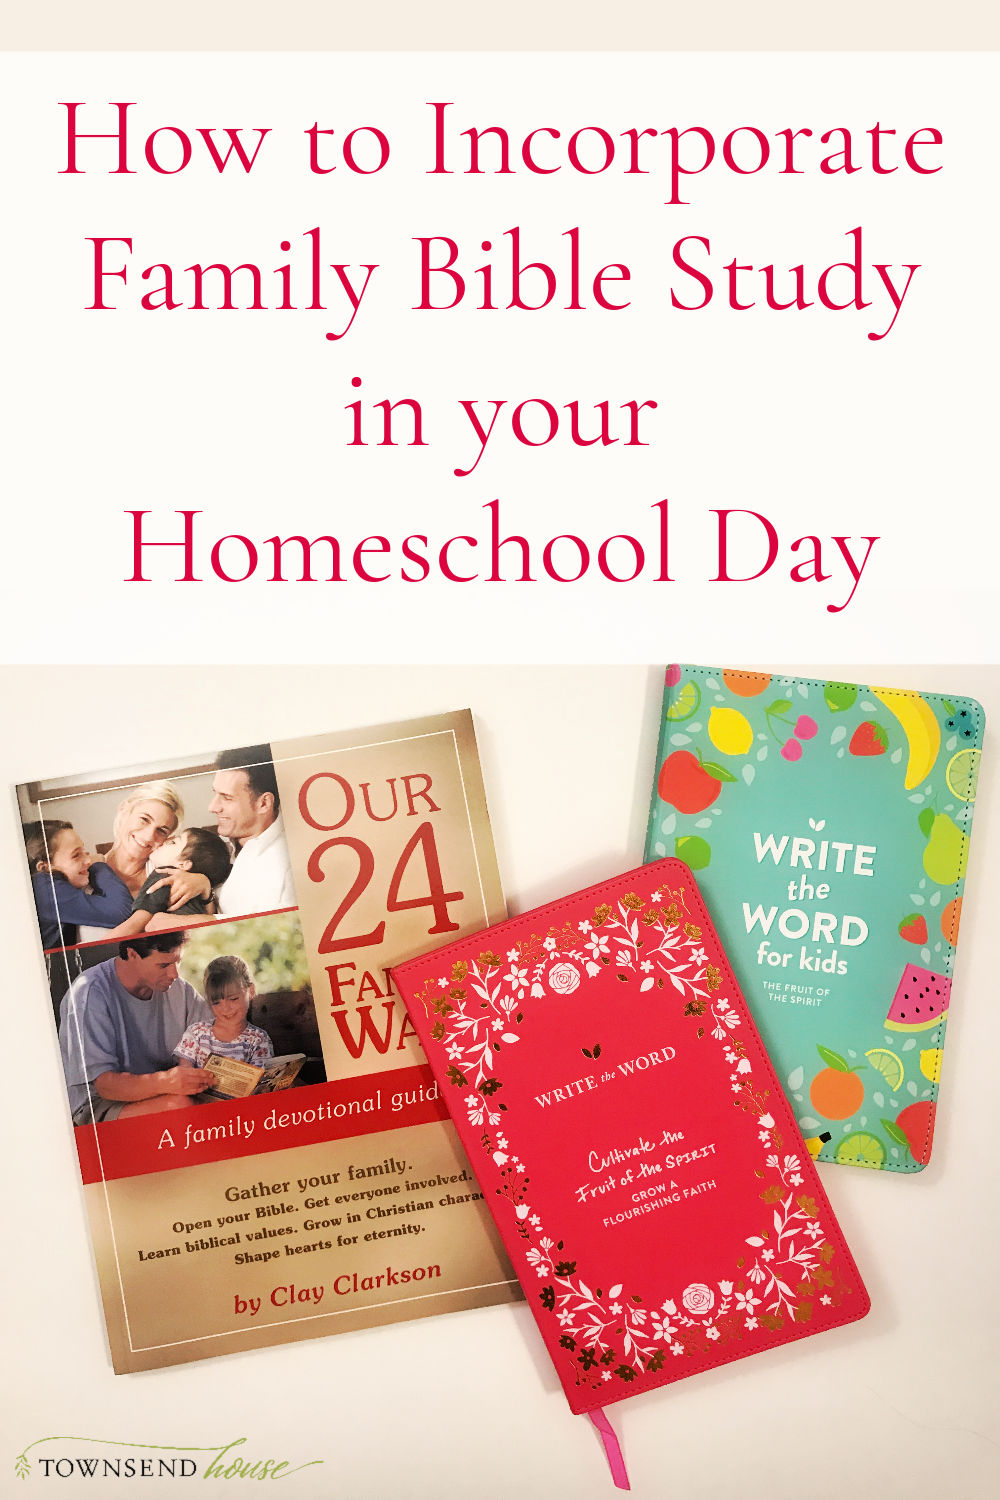 How to Incorporate Family Bible Study in Homeschool